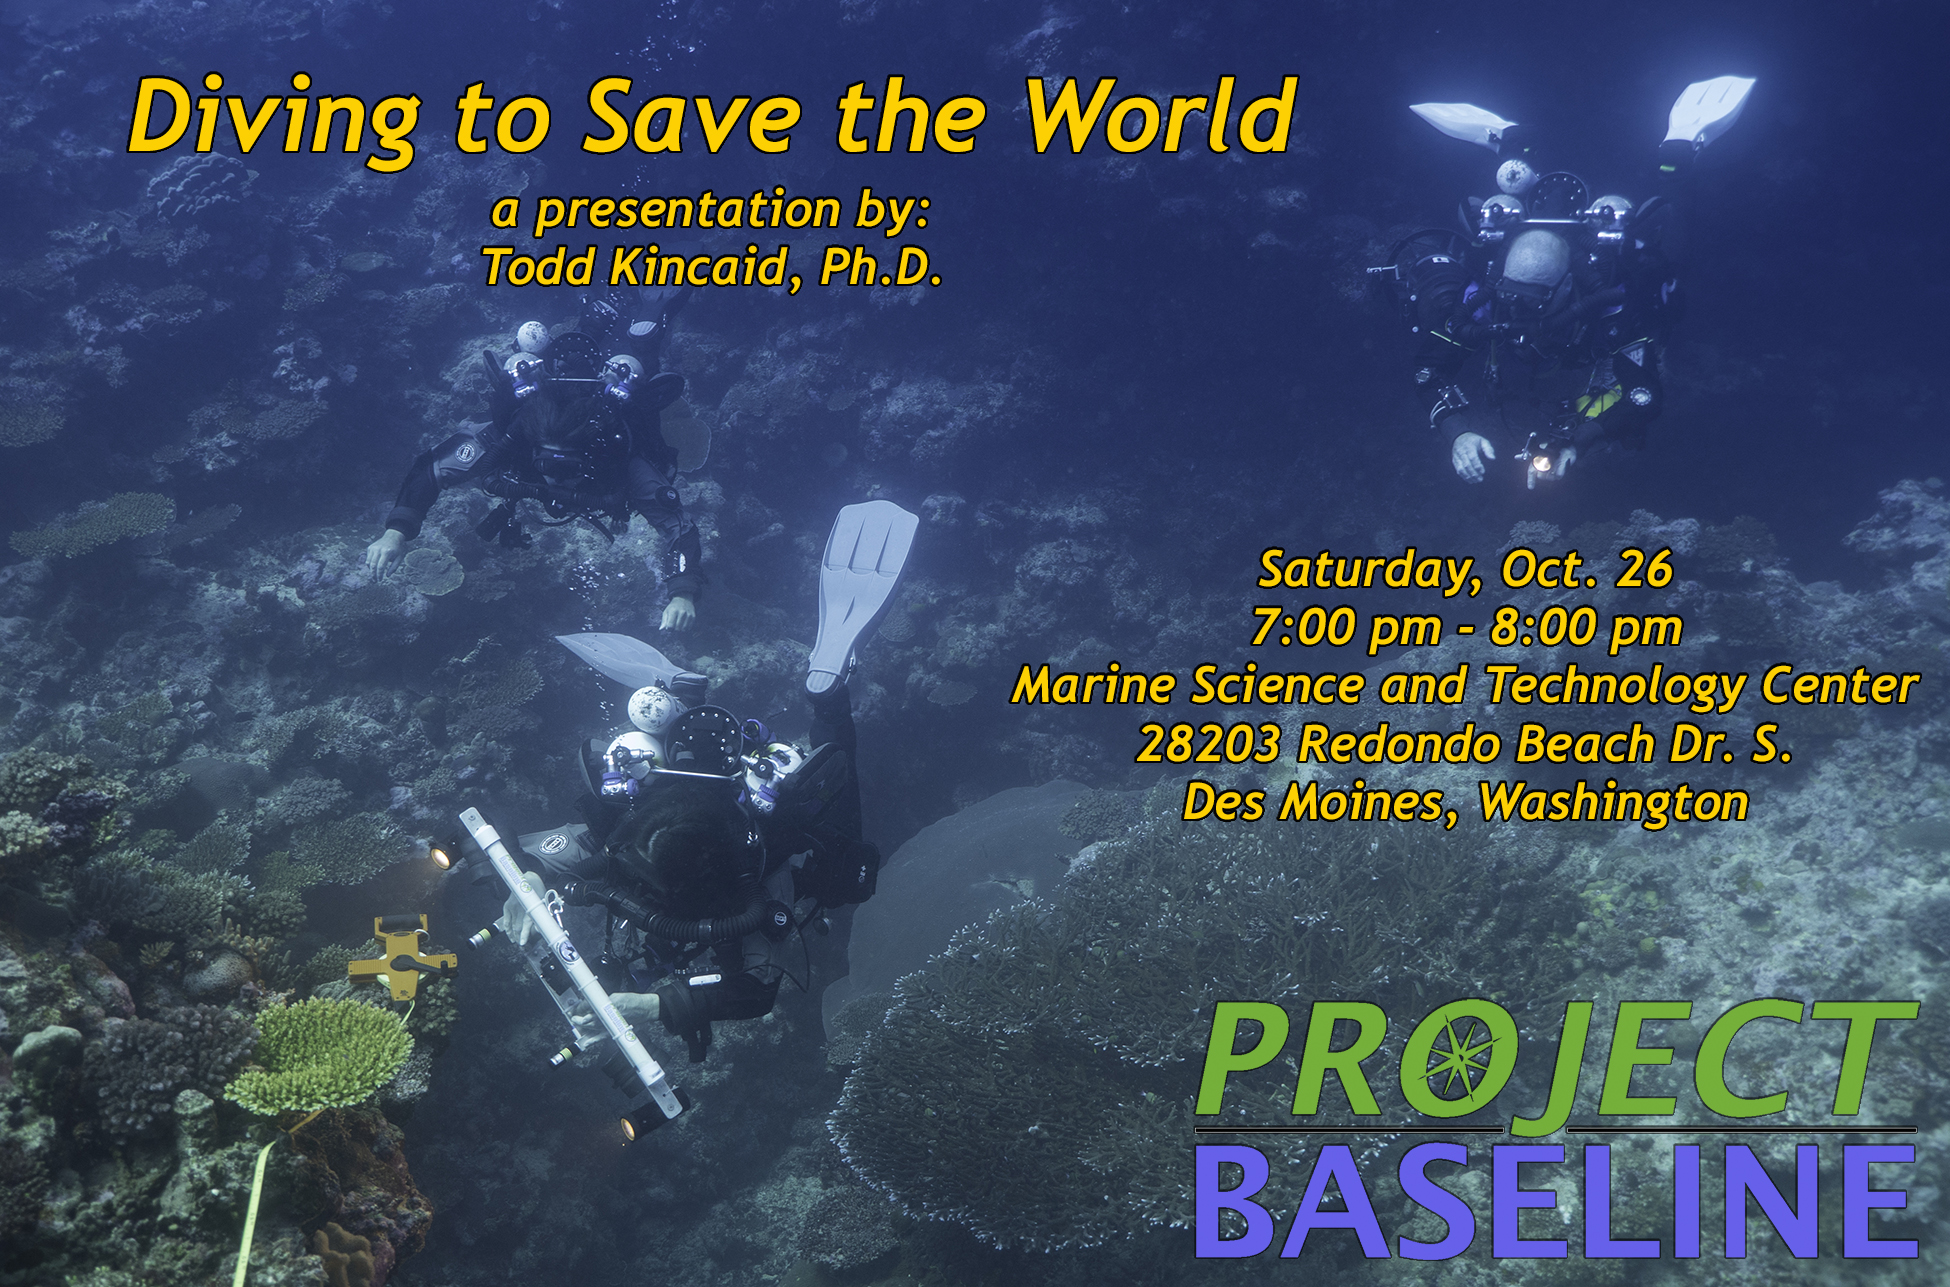 Project Baseline’s Executive Director to Give a Talk in Seattle